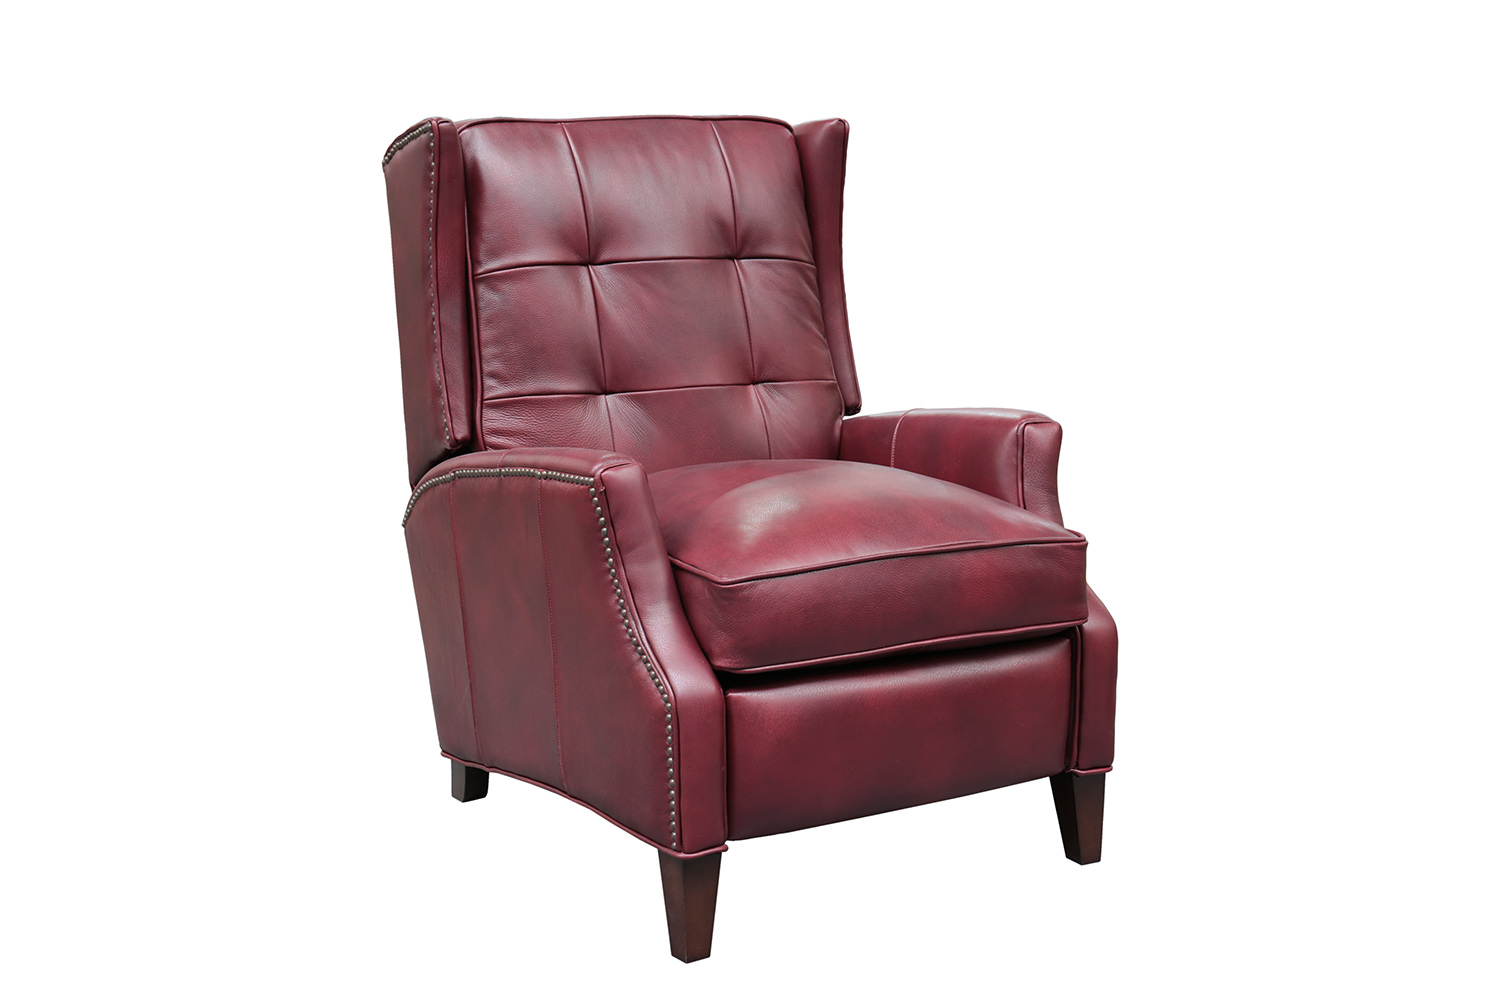 Barcalounger Lincoln Recliner Chair - Wenlock Carmine/All Leather